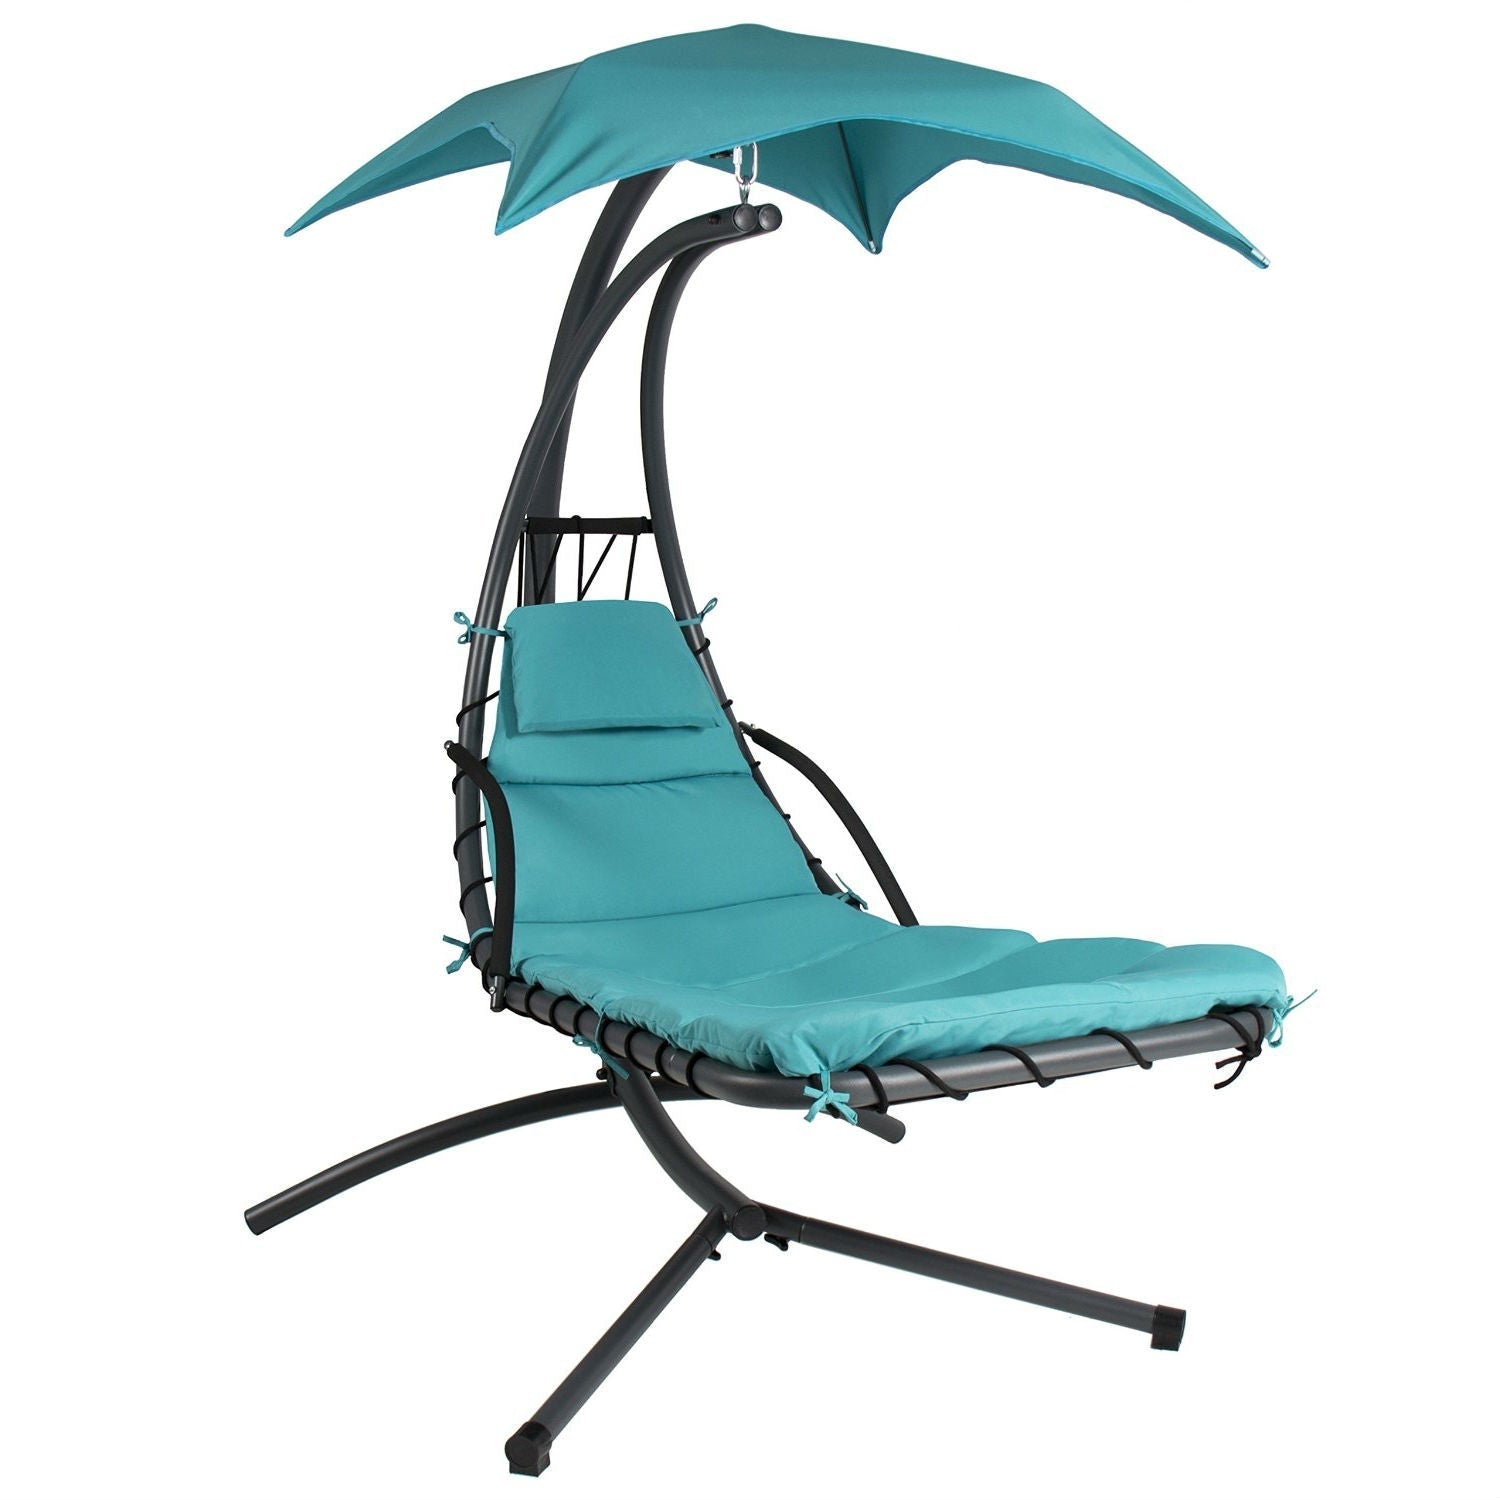 Outdoor > Outdoor Furniture > Porch Swings And Gliders - Teal Single Person Sturdy Modern Chaise Lounger Hammock Chair Porch Swing